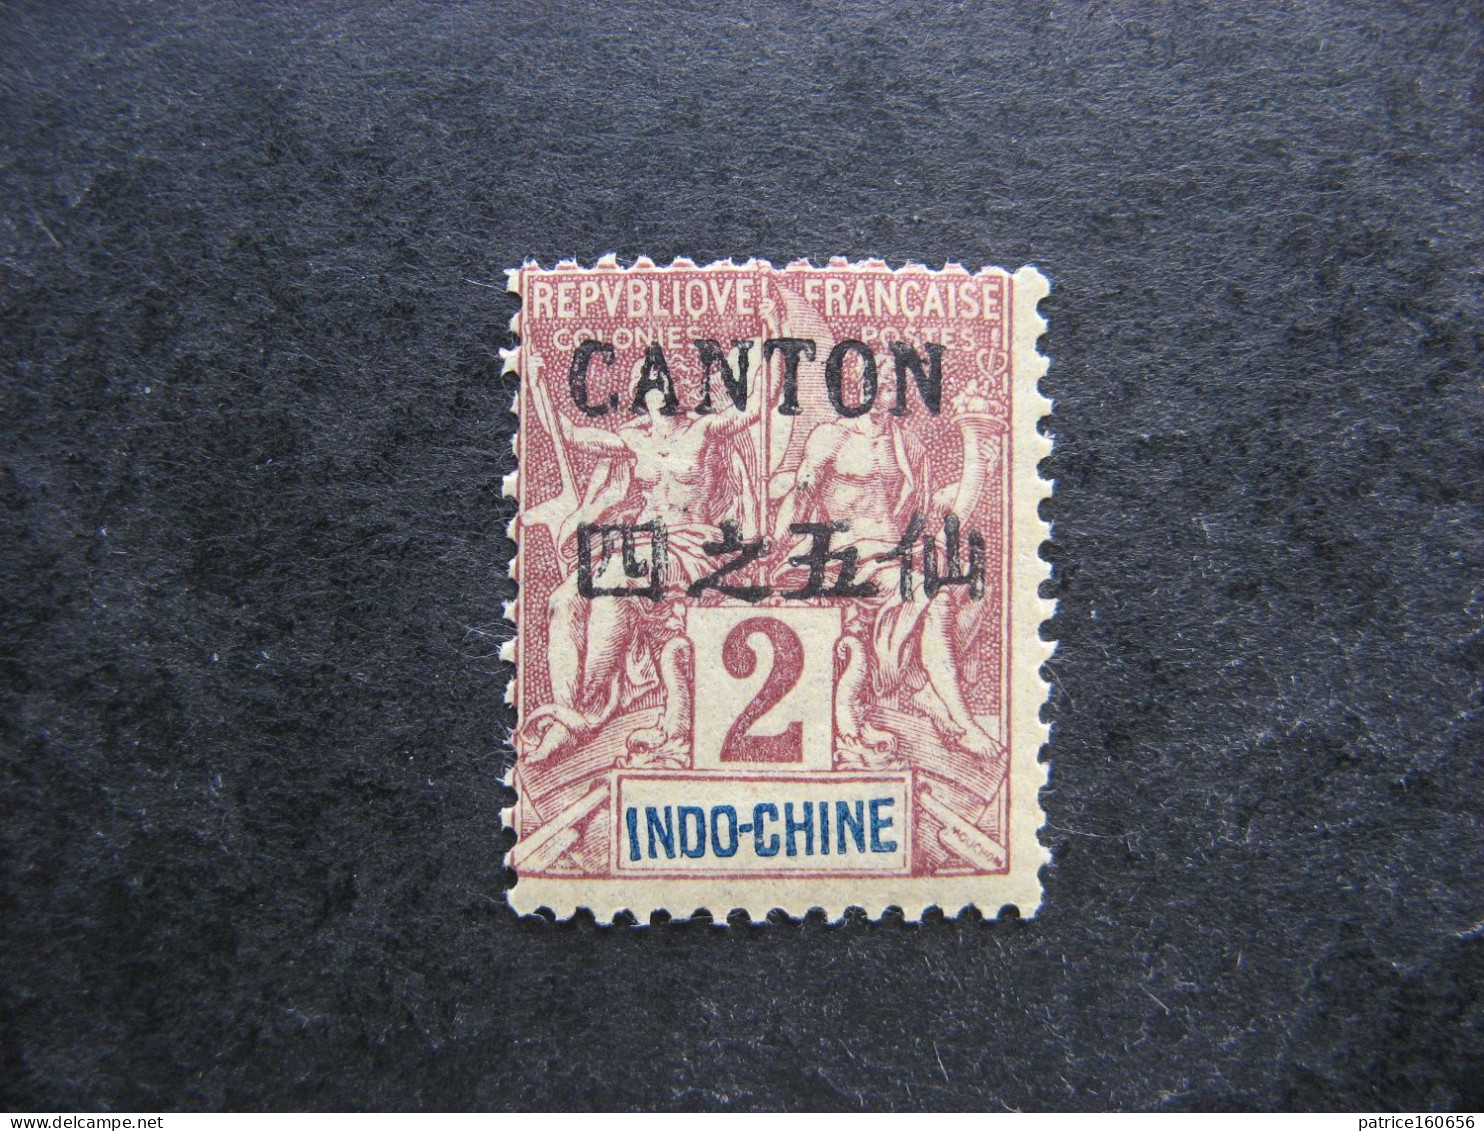 Canton: TB N° 18, Surcharge Chinoise Recto Verso, Neuf X. - Unused Stamps